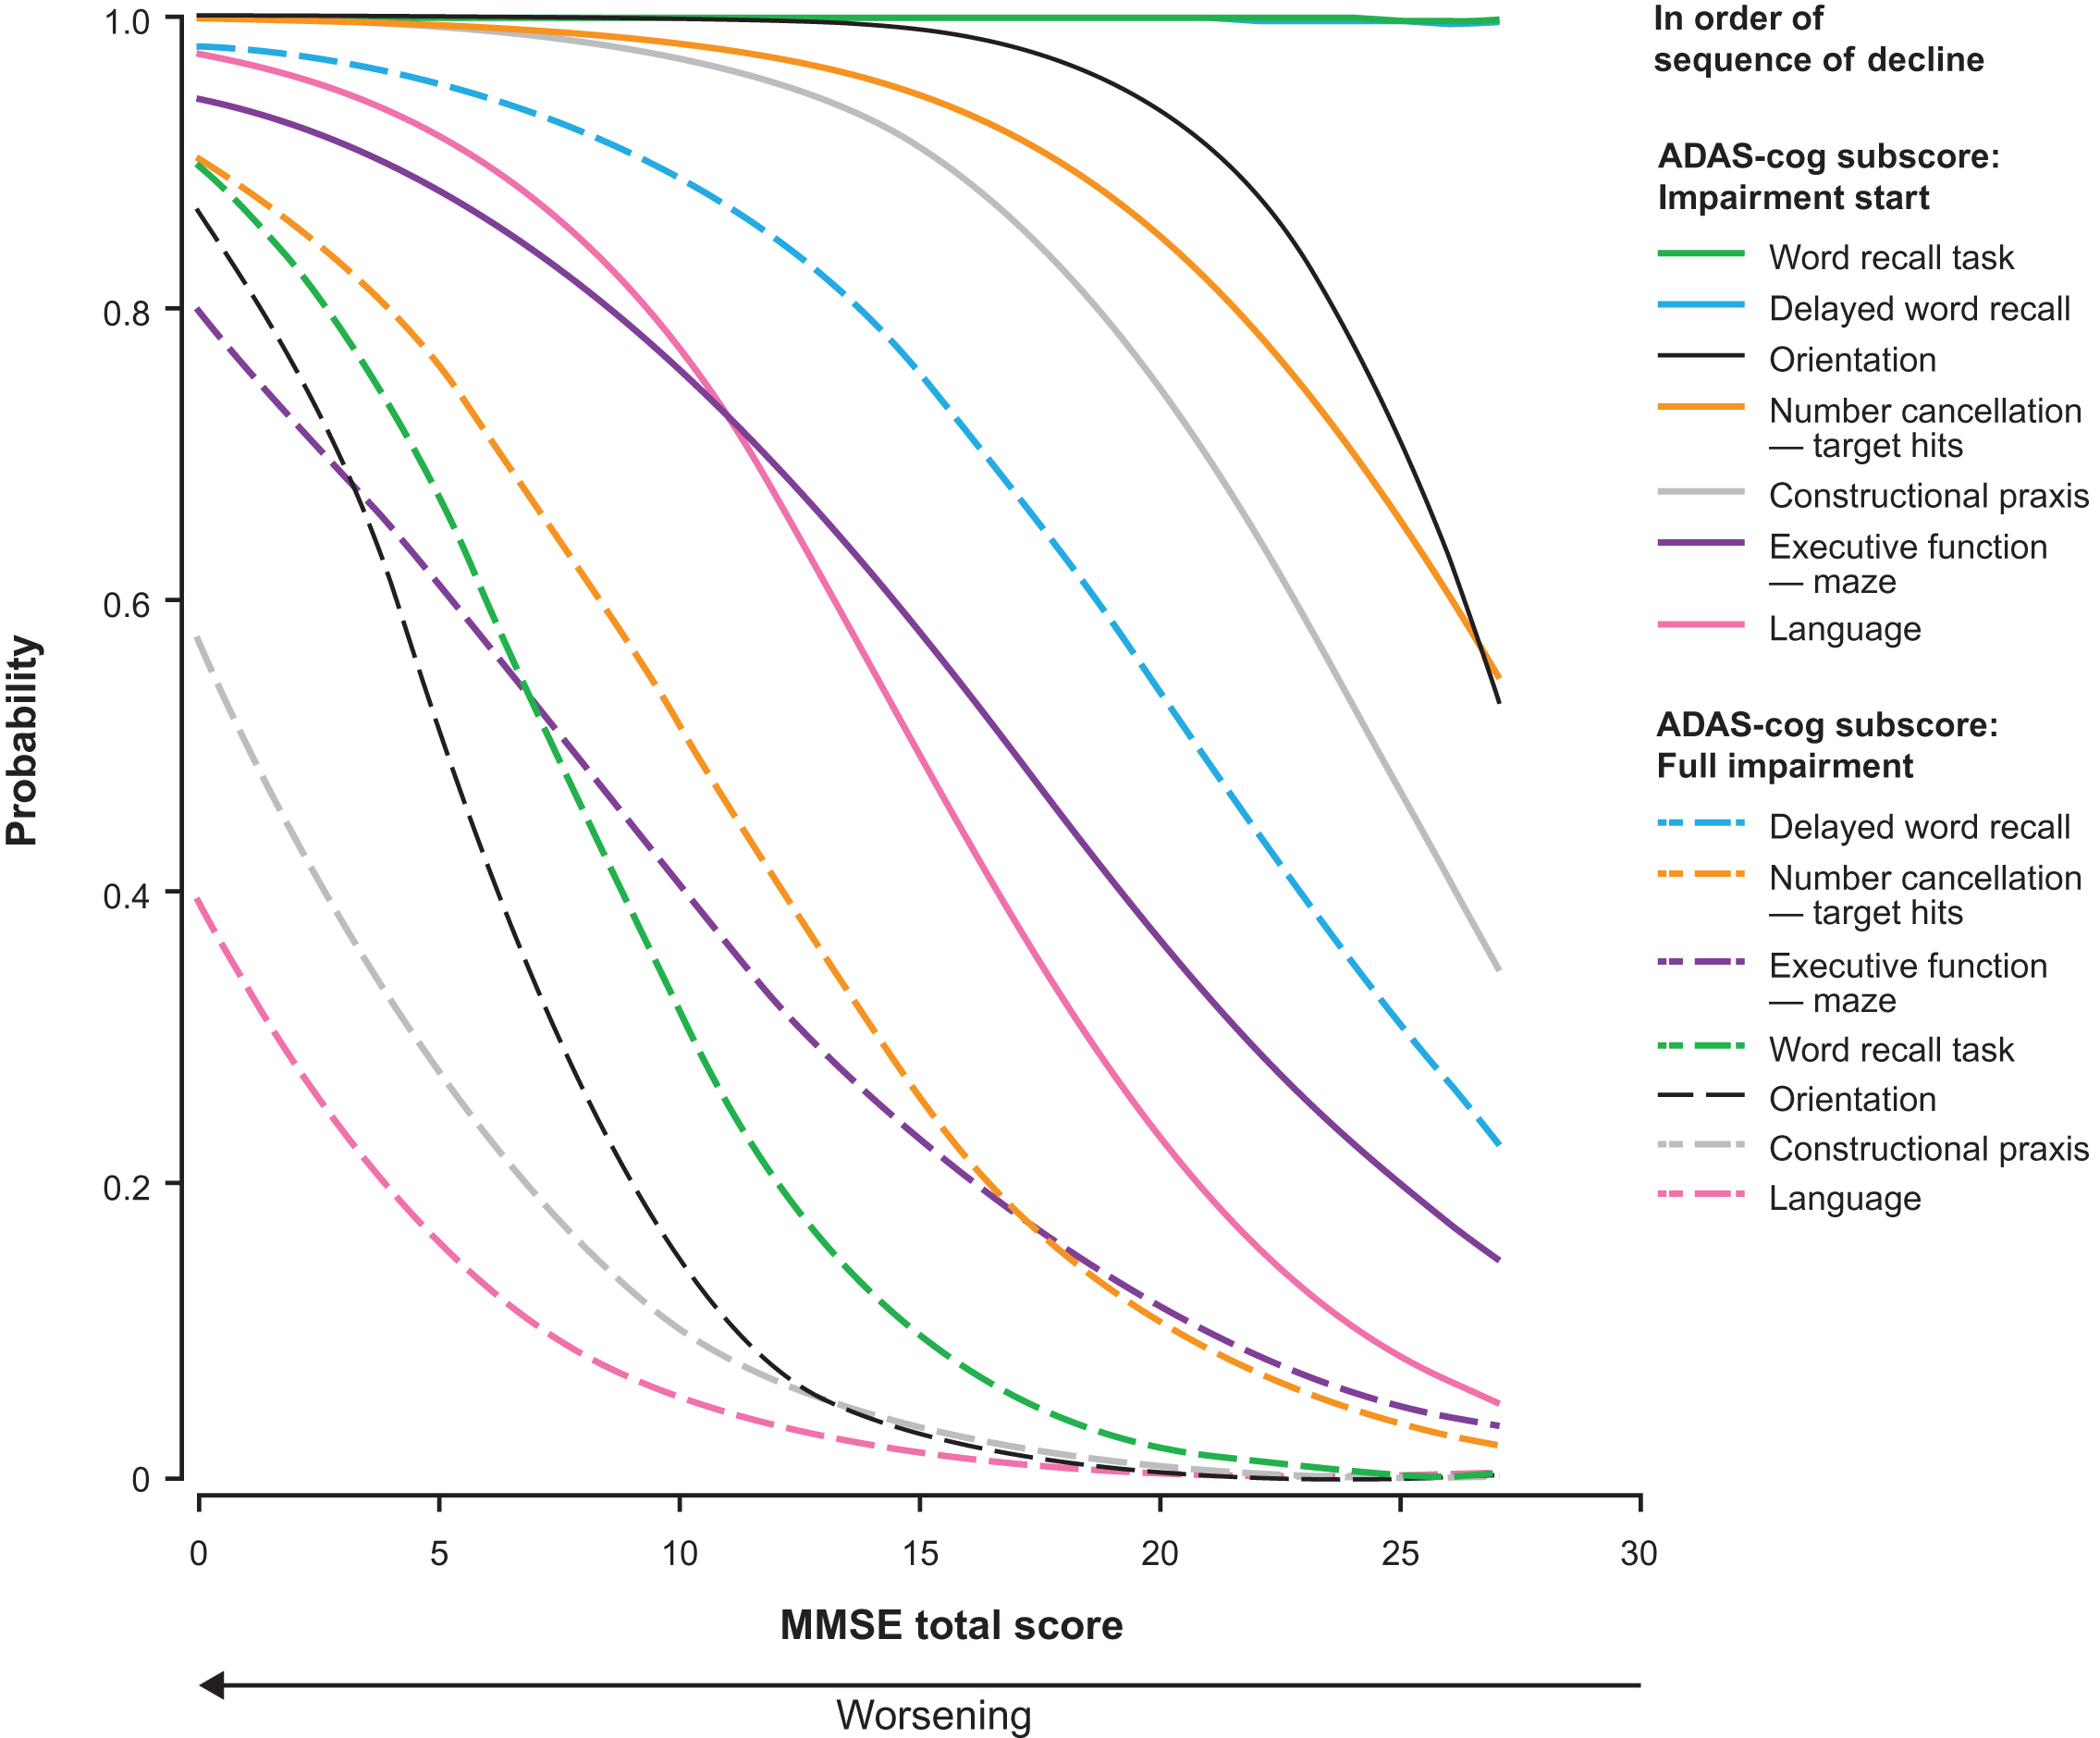 Probability of impairment start and full impairment for the ADAS-cog subscores as estimated by the proportional odds model with MMSE total score as the dependent variable. ADAS-cog scores were available for 1,026 patients with mild or moderate AD (MMSE score ≥ 14); data missing for 12 patients.